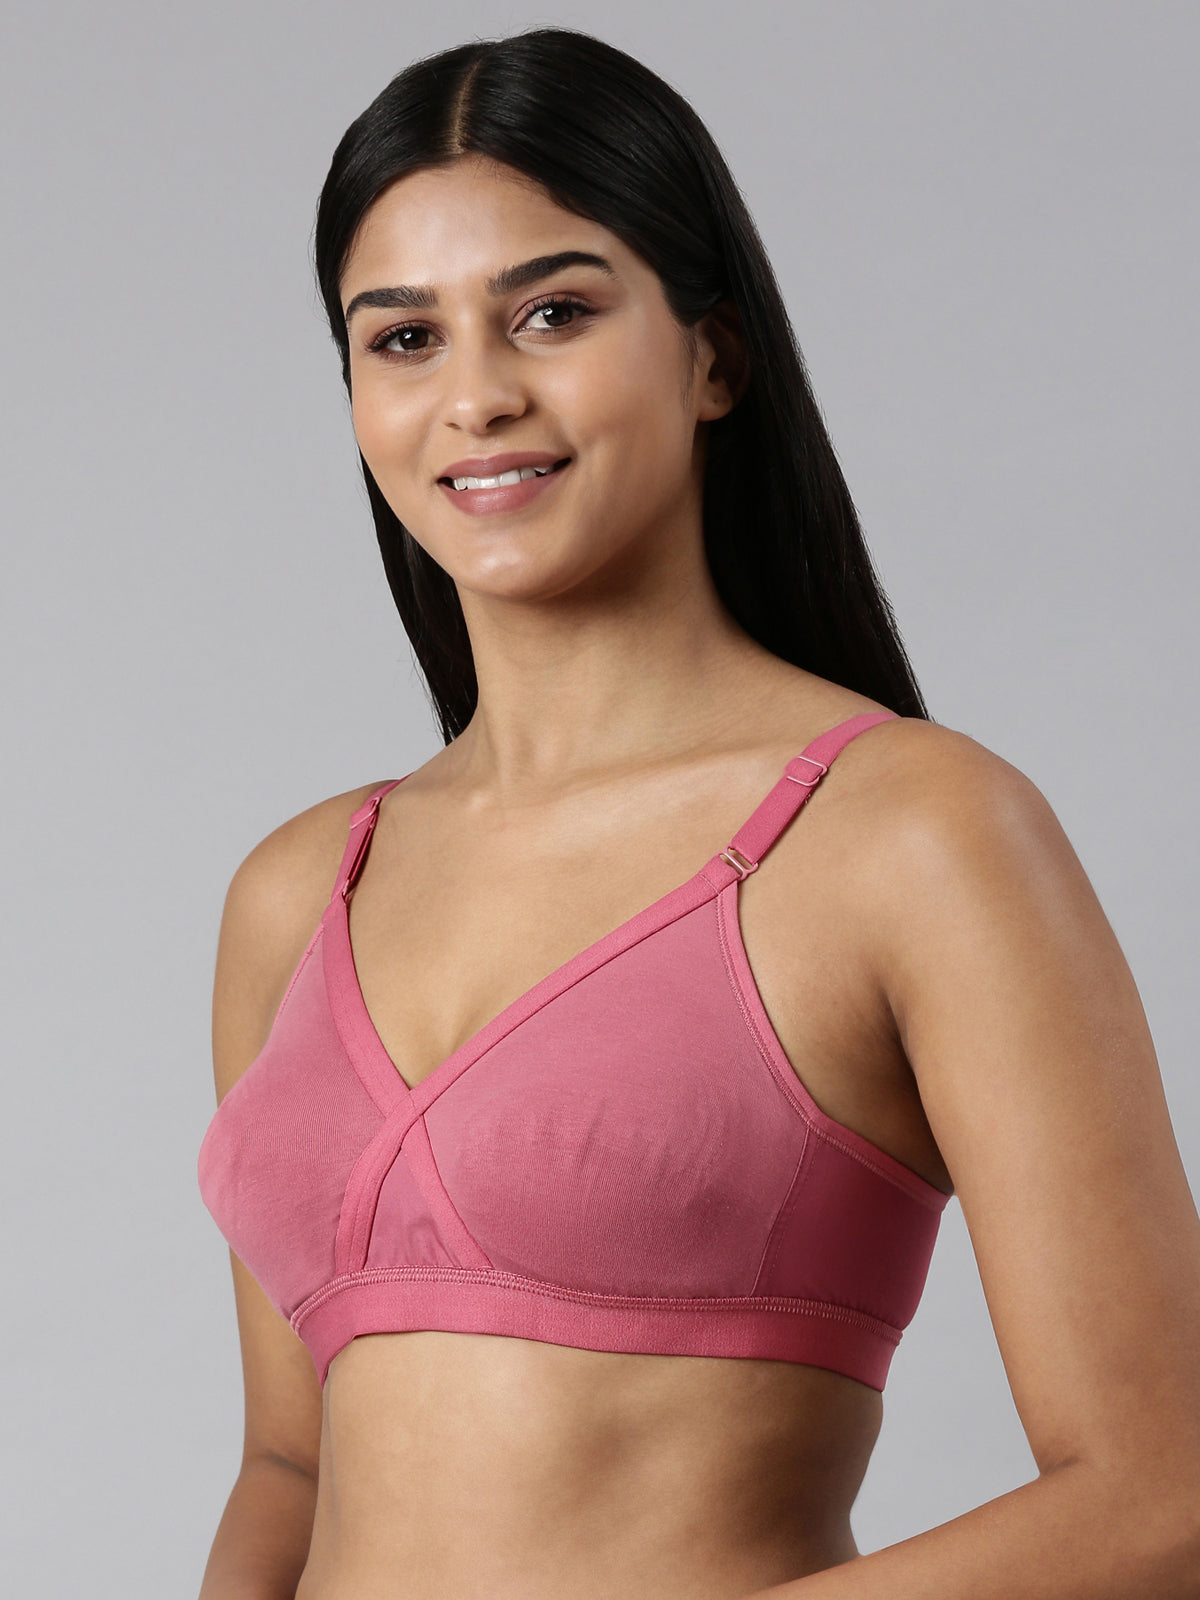 blossom-cotton cross-rose gold3-Woven knitted-support bra